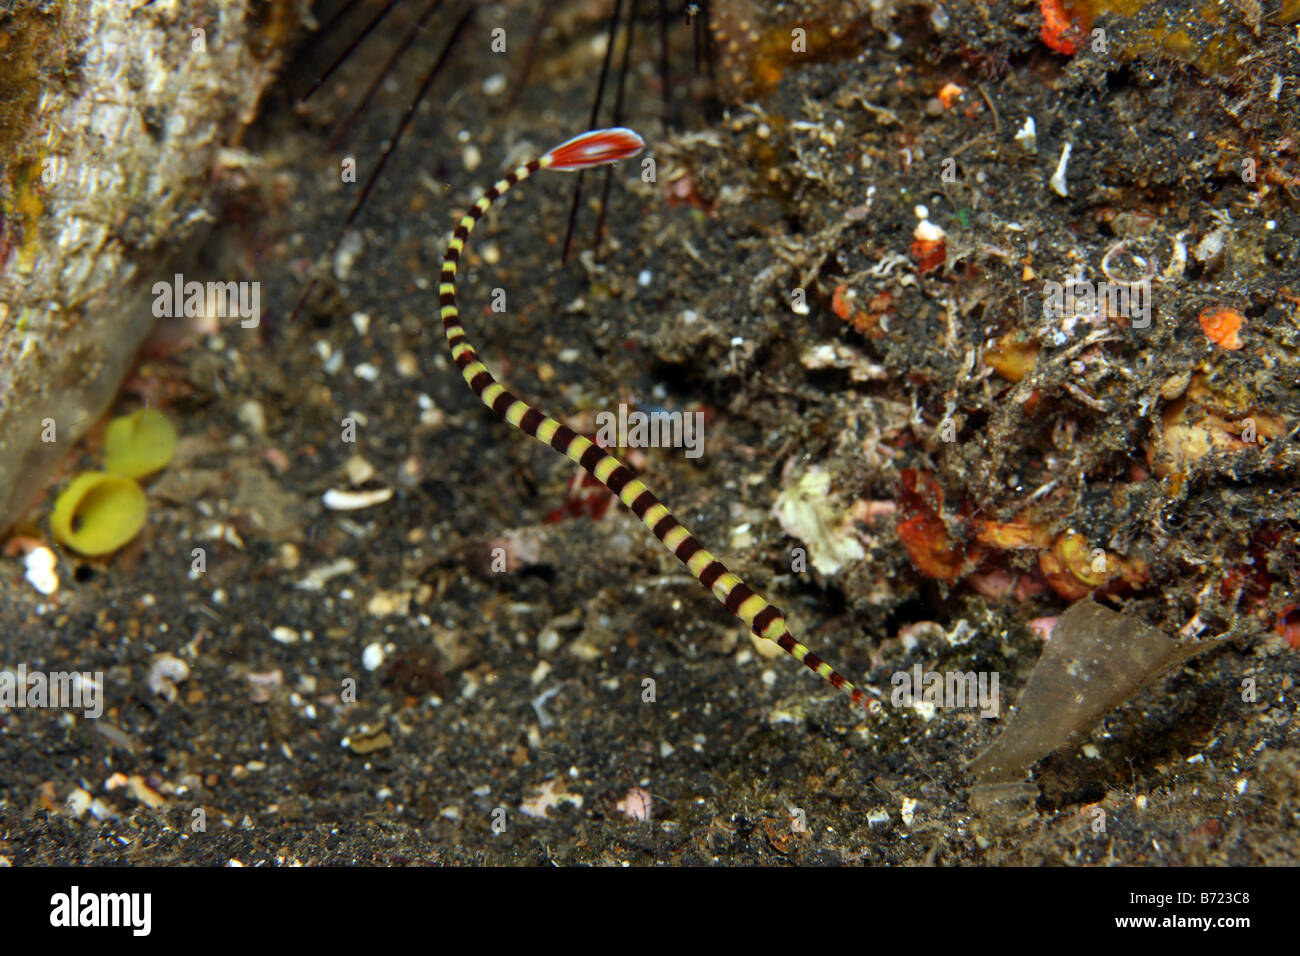 Ringed pipefish Doryrhamphus dactyliophorus swimming on coral reef with other fish Stock Photo